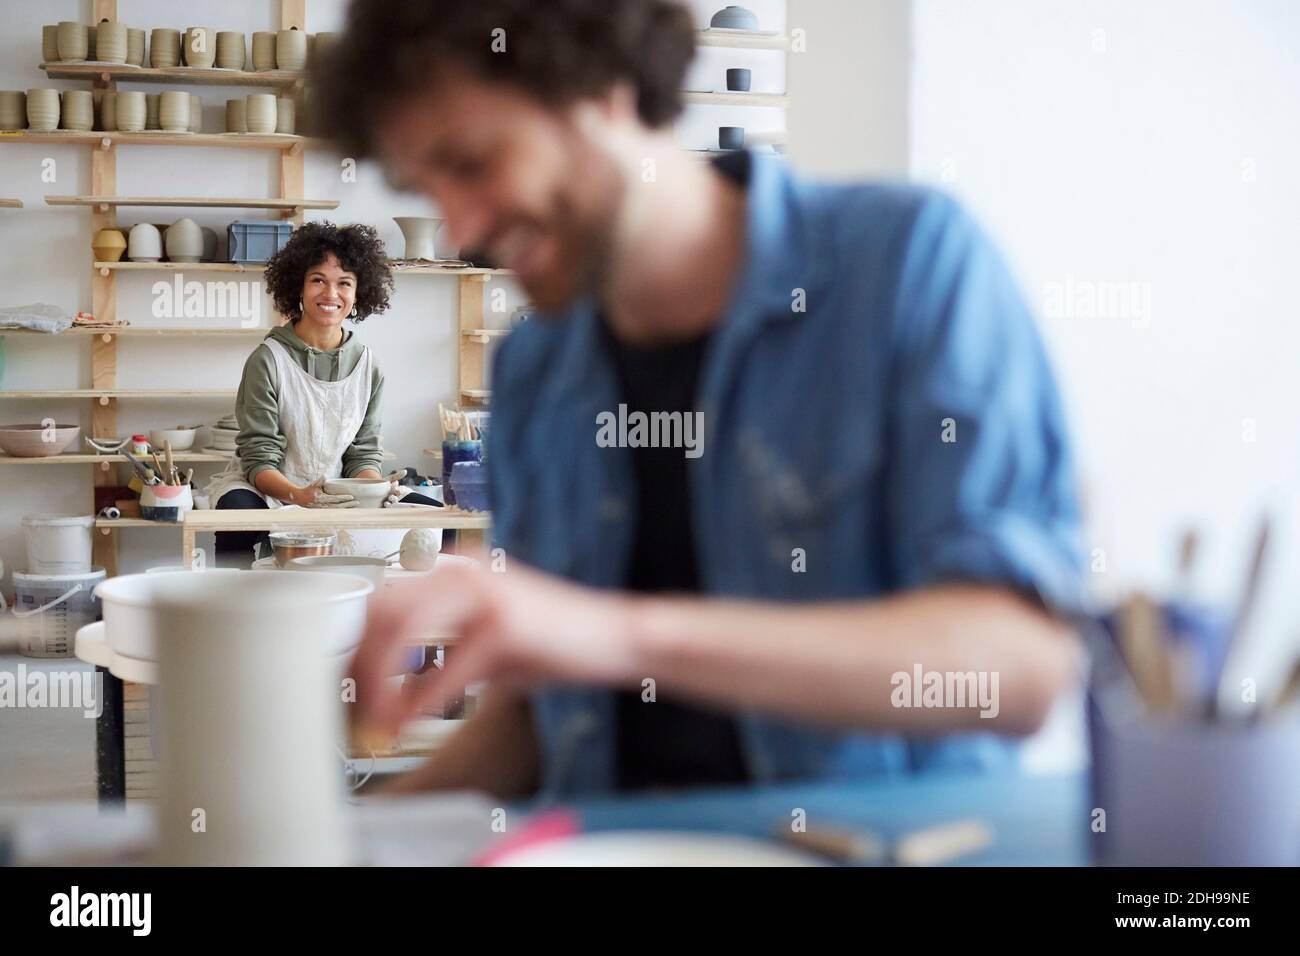 Portrait of smiling woman learning pottery while man in foreground at art studio Stock Photo